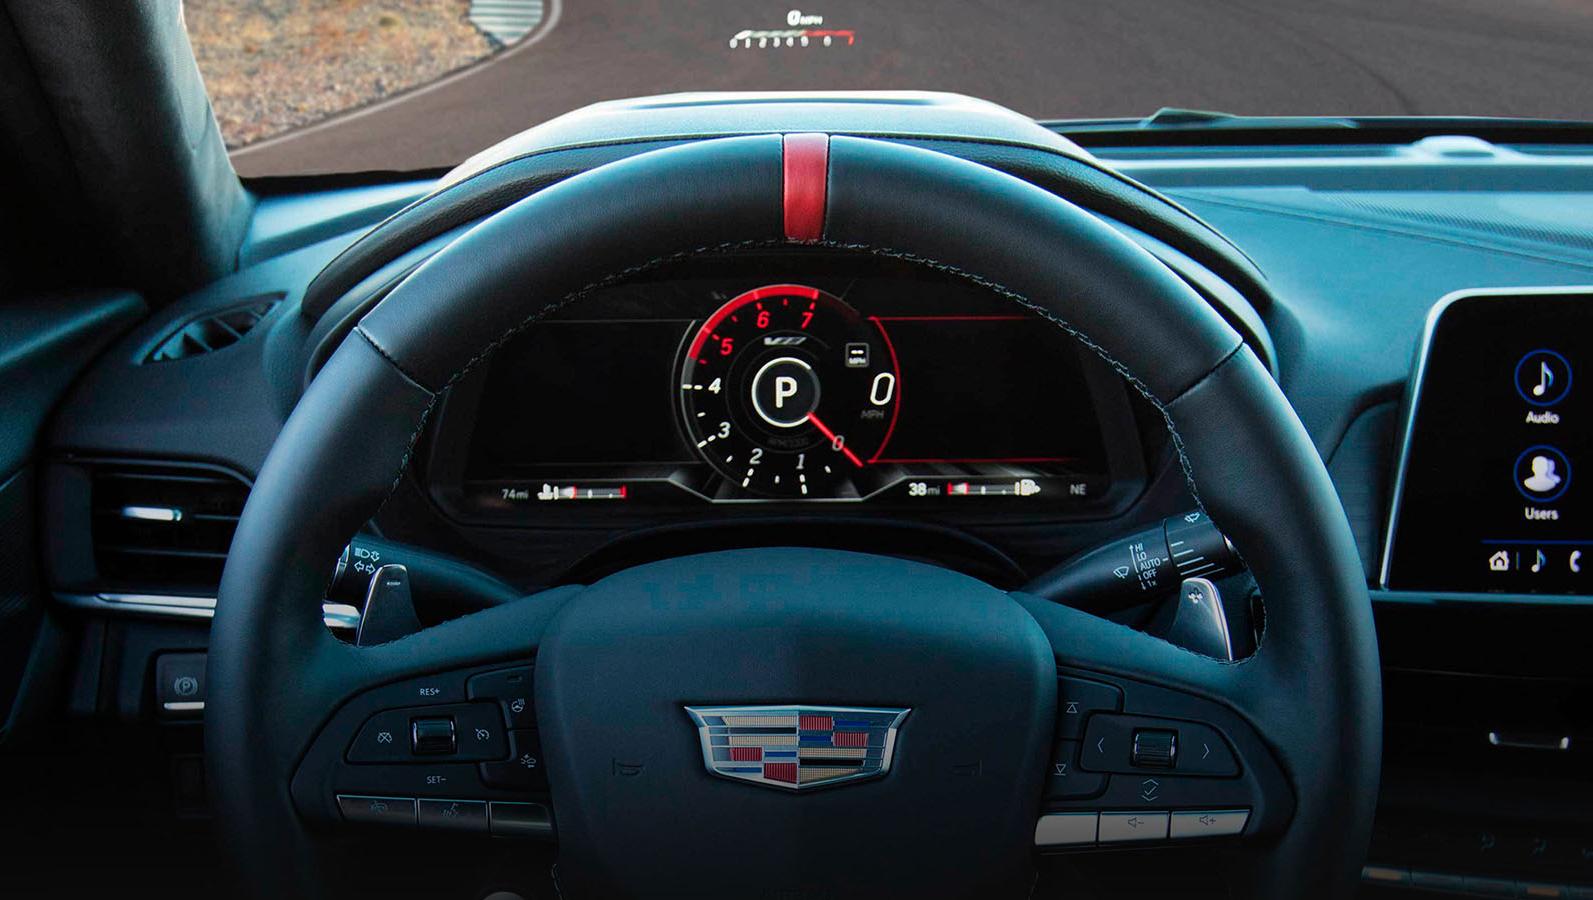 CT4-V Blackwing steering wheel while parked 